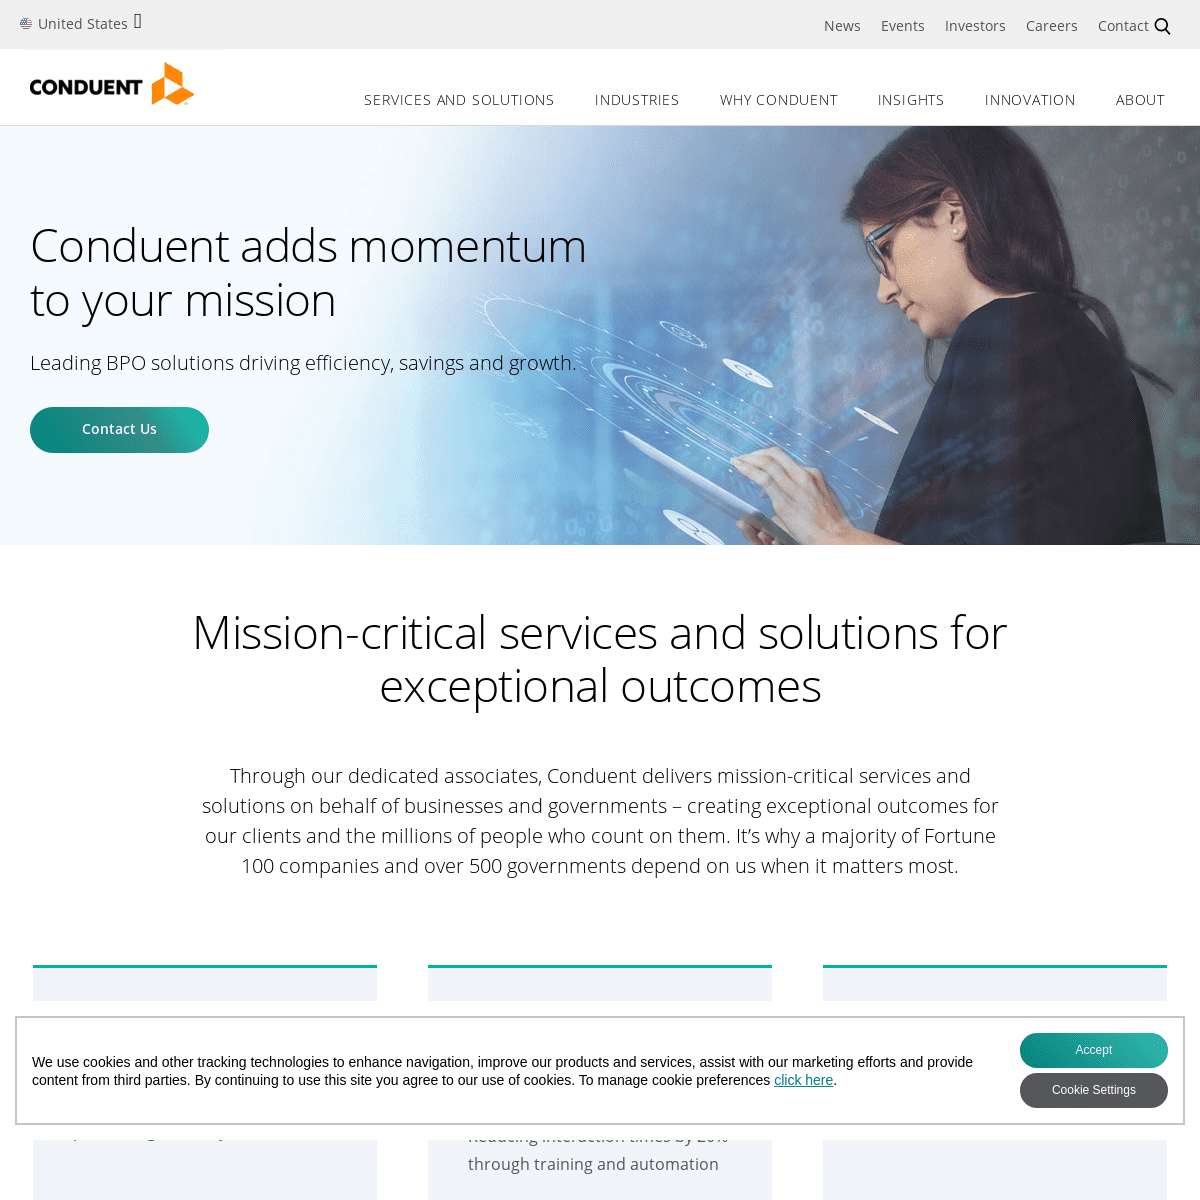 A complete backup of https://conduent.com